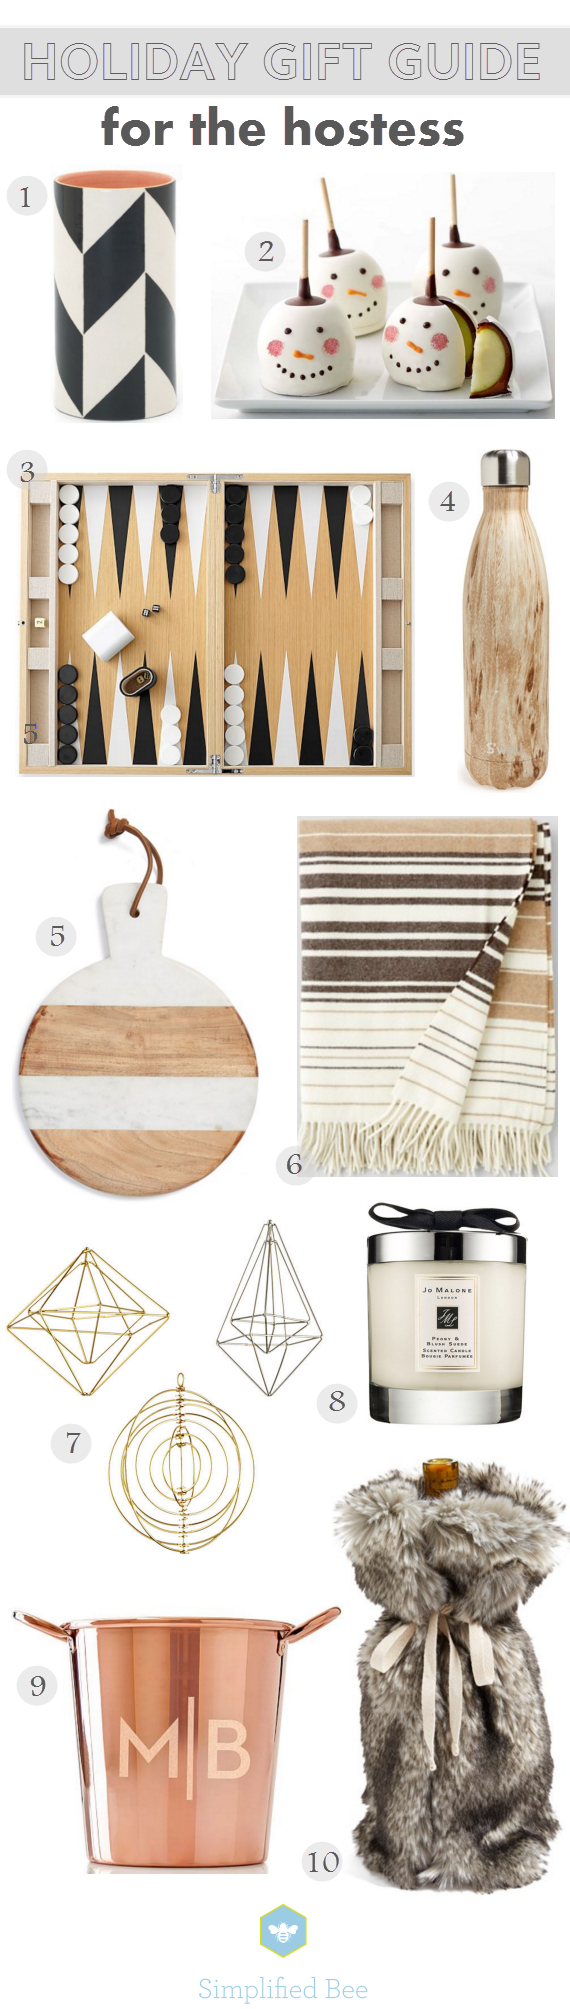 holiday gift guide 2015 // hostess gift ideas // via @simplifiedbee